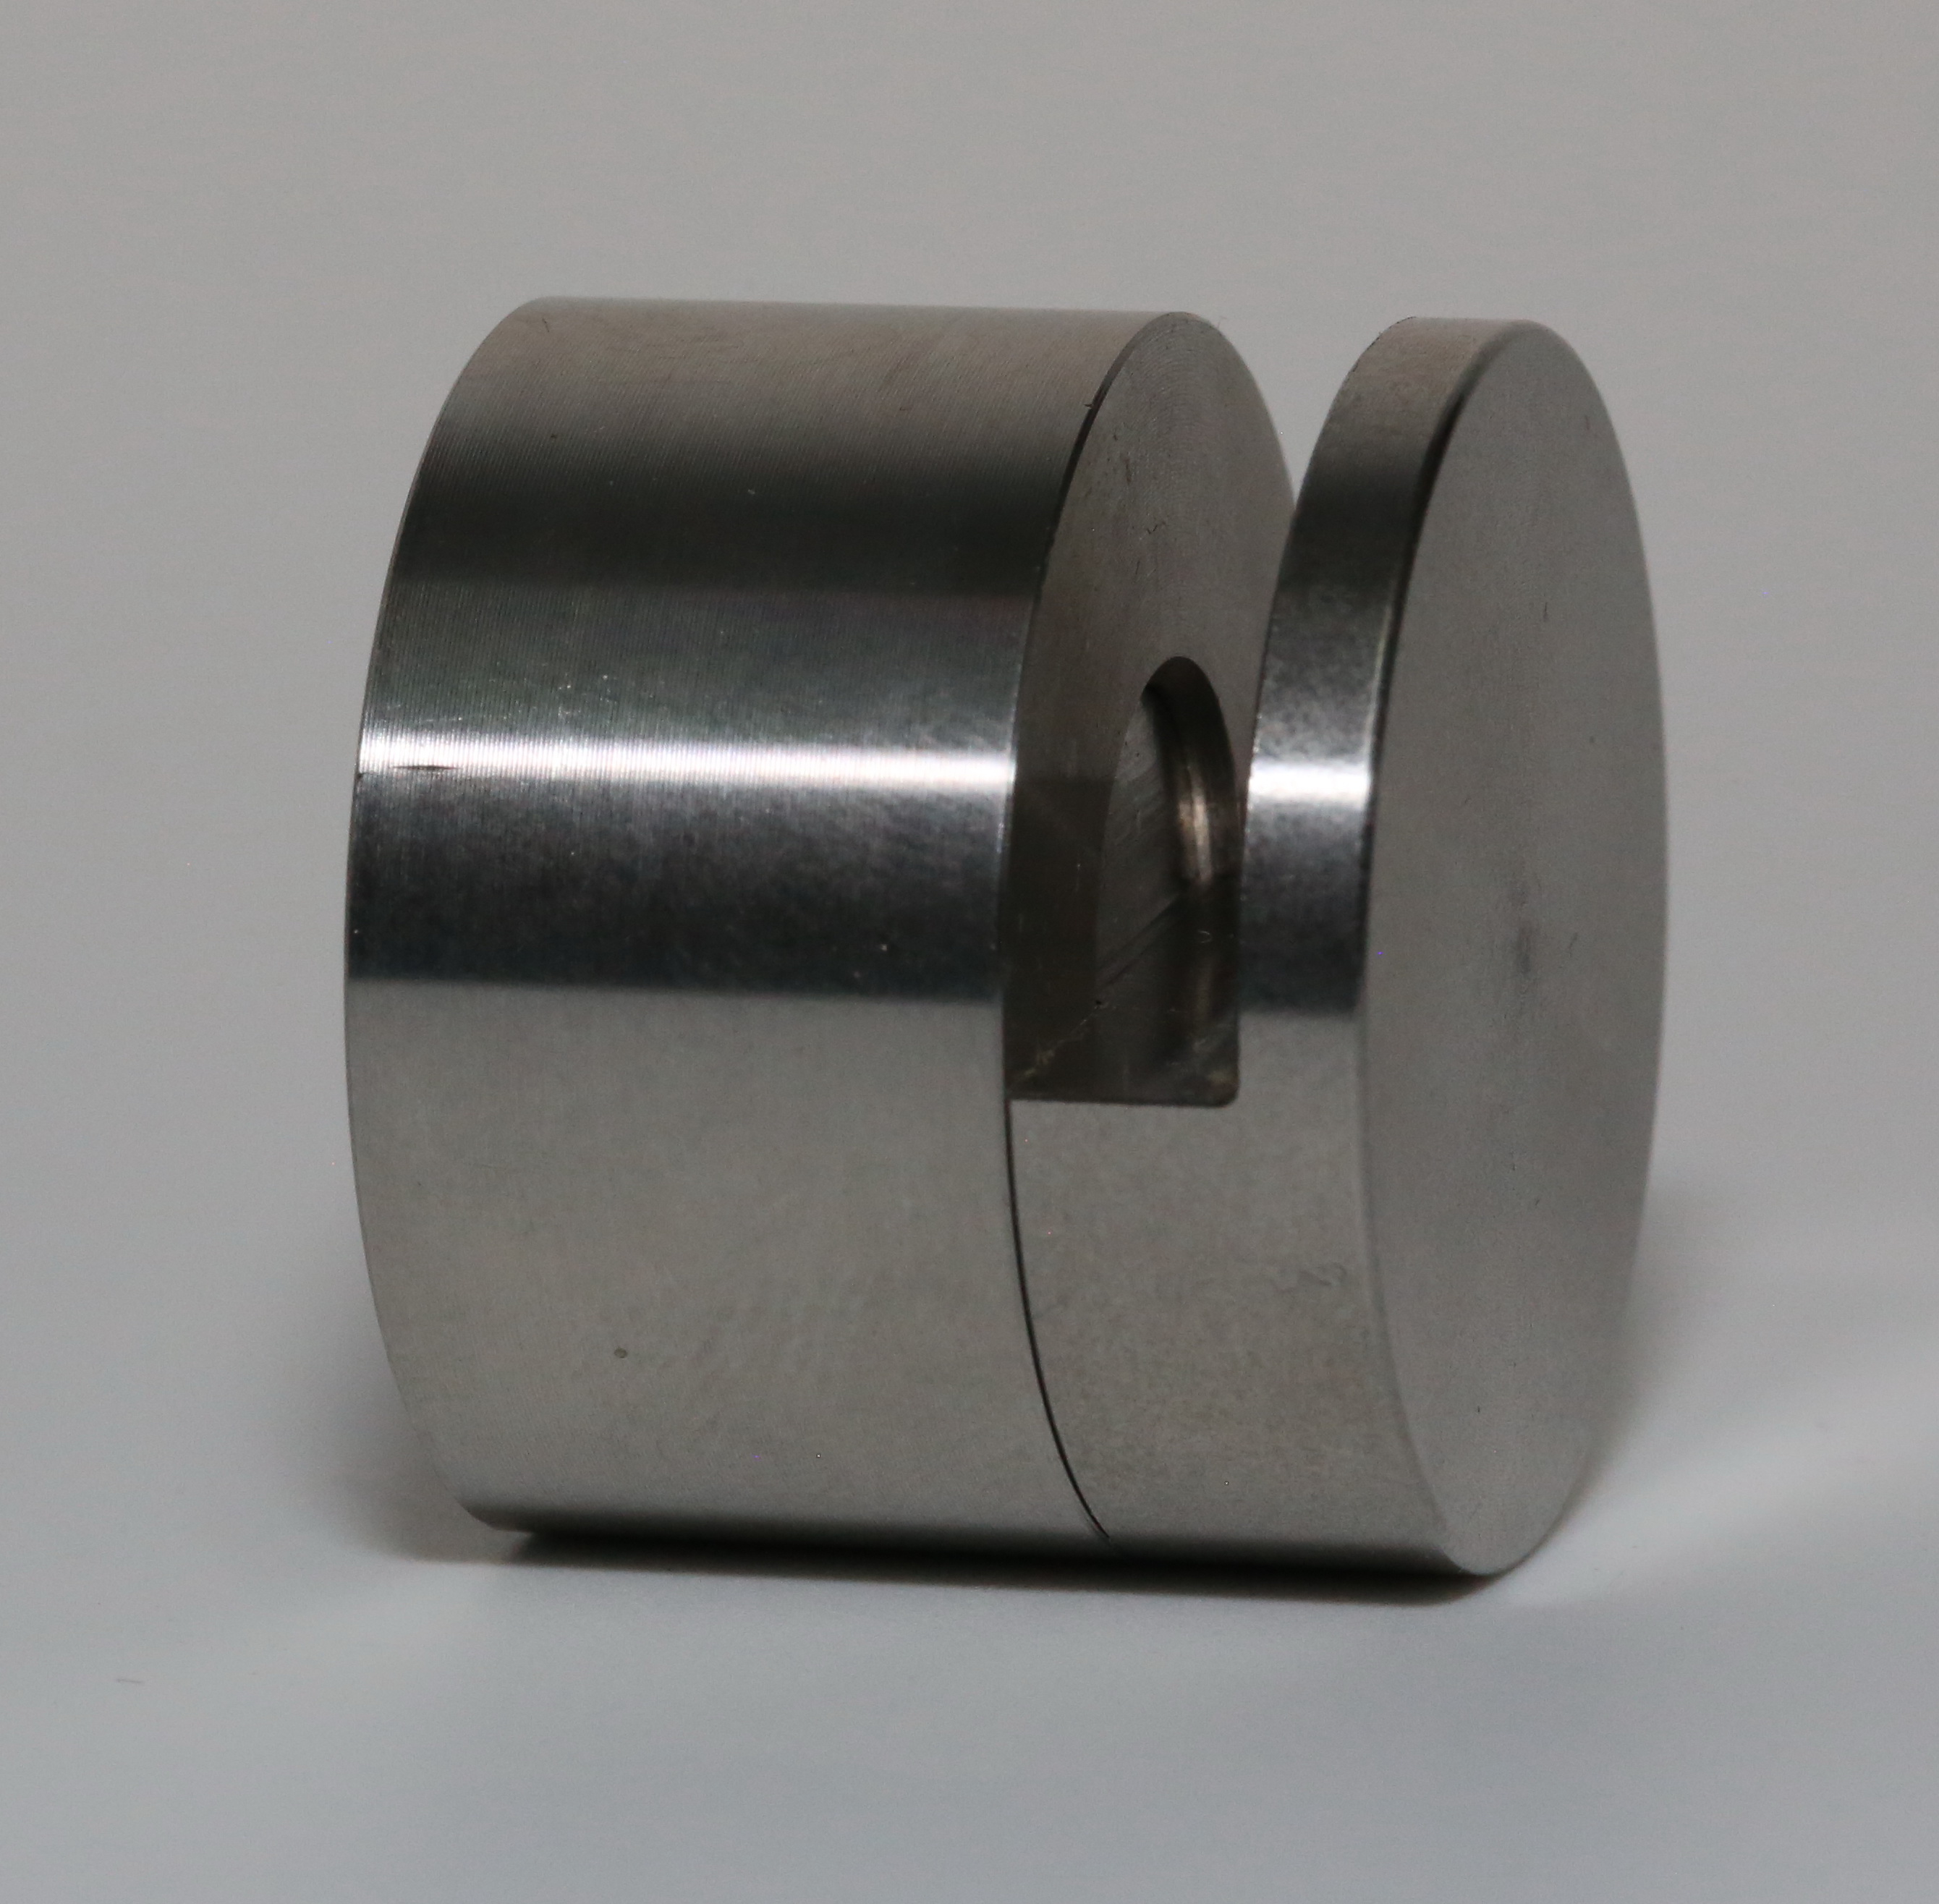 Stainless steel distance holder with clamp for 6mm glass